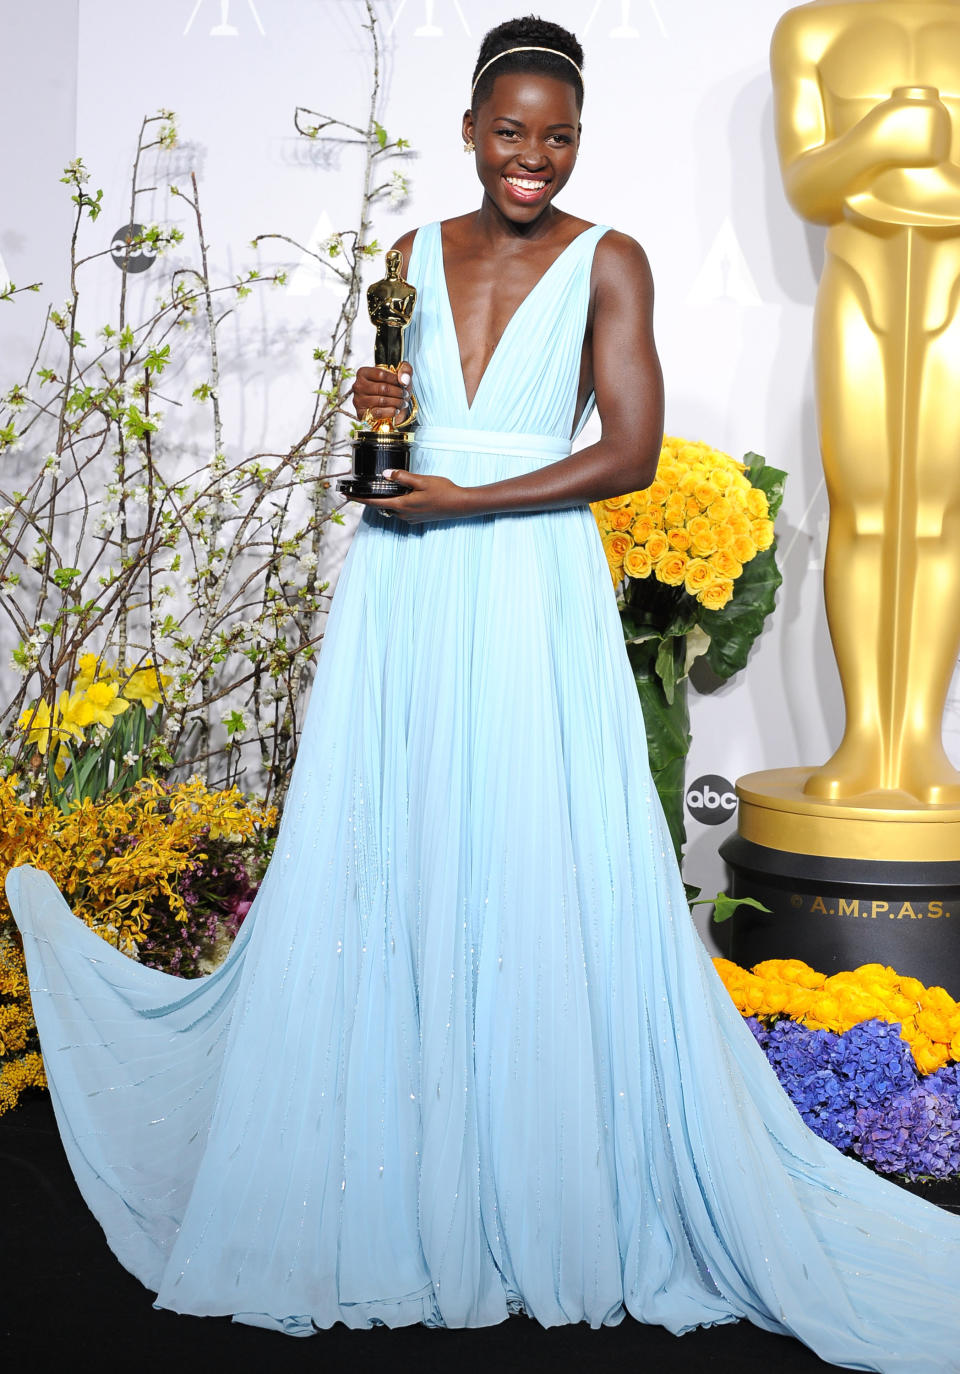 Lupita Nyong'o holding an Oscar, wearing a plunging V-neck light blue gown with a flowing skirt, standing beside a golden statue